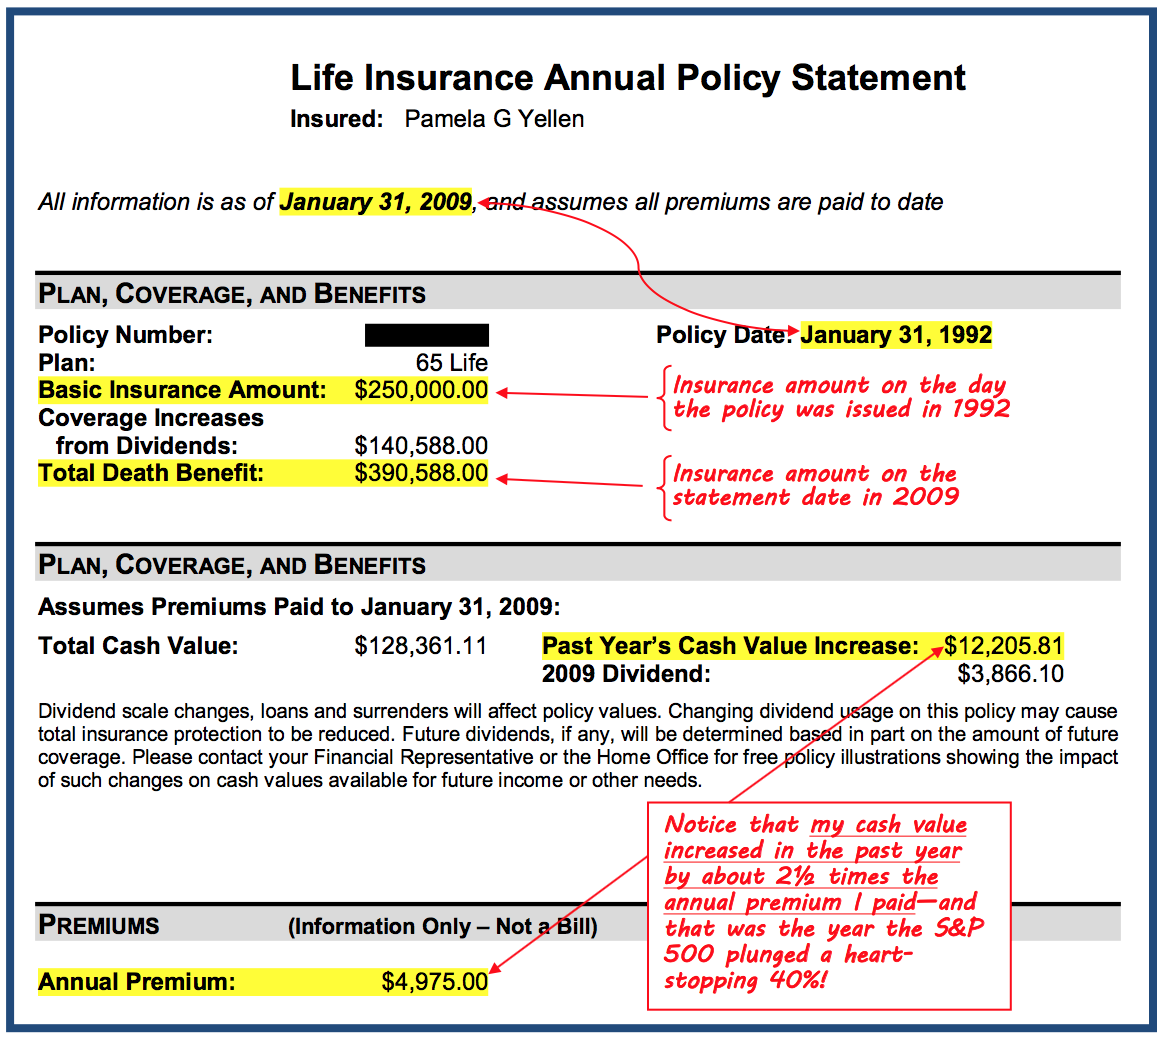 Life insurance annual policy statement